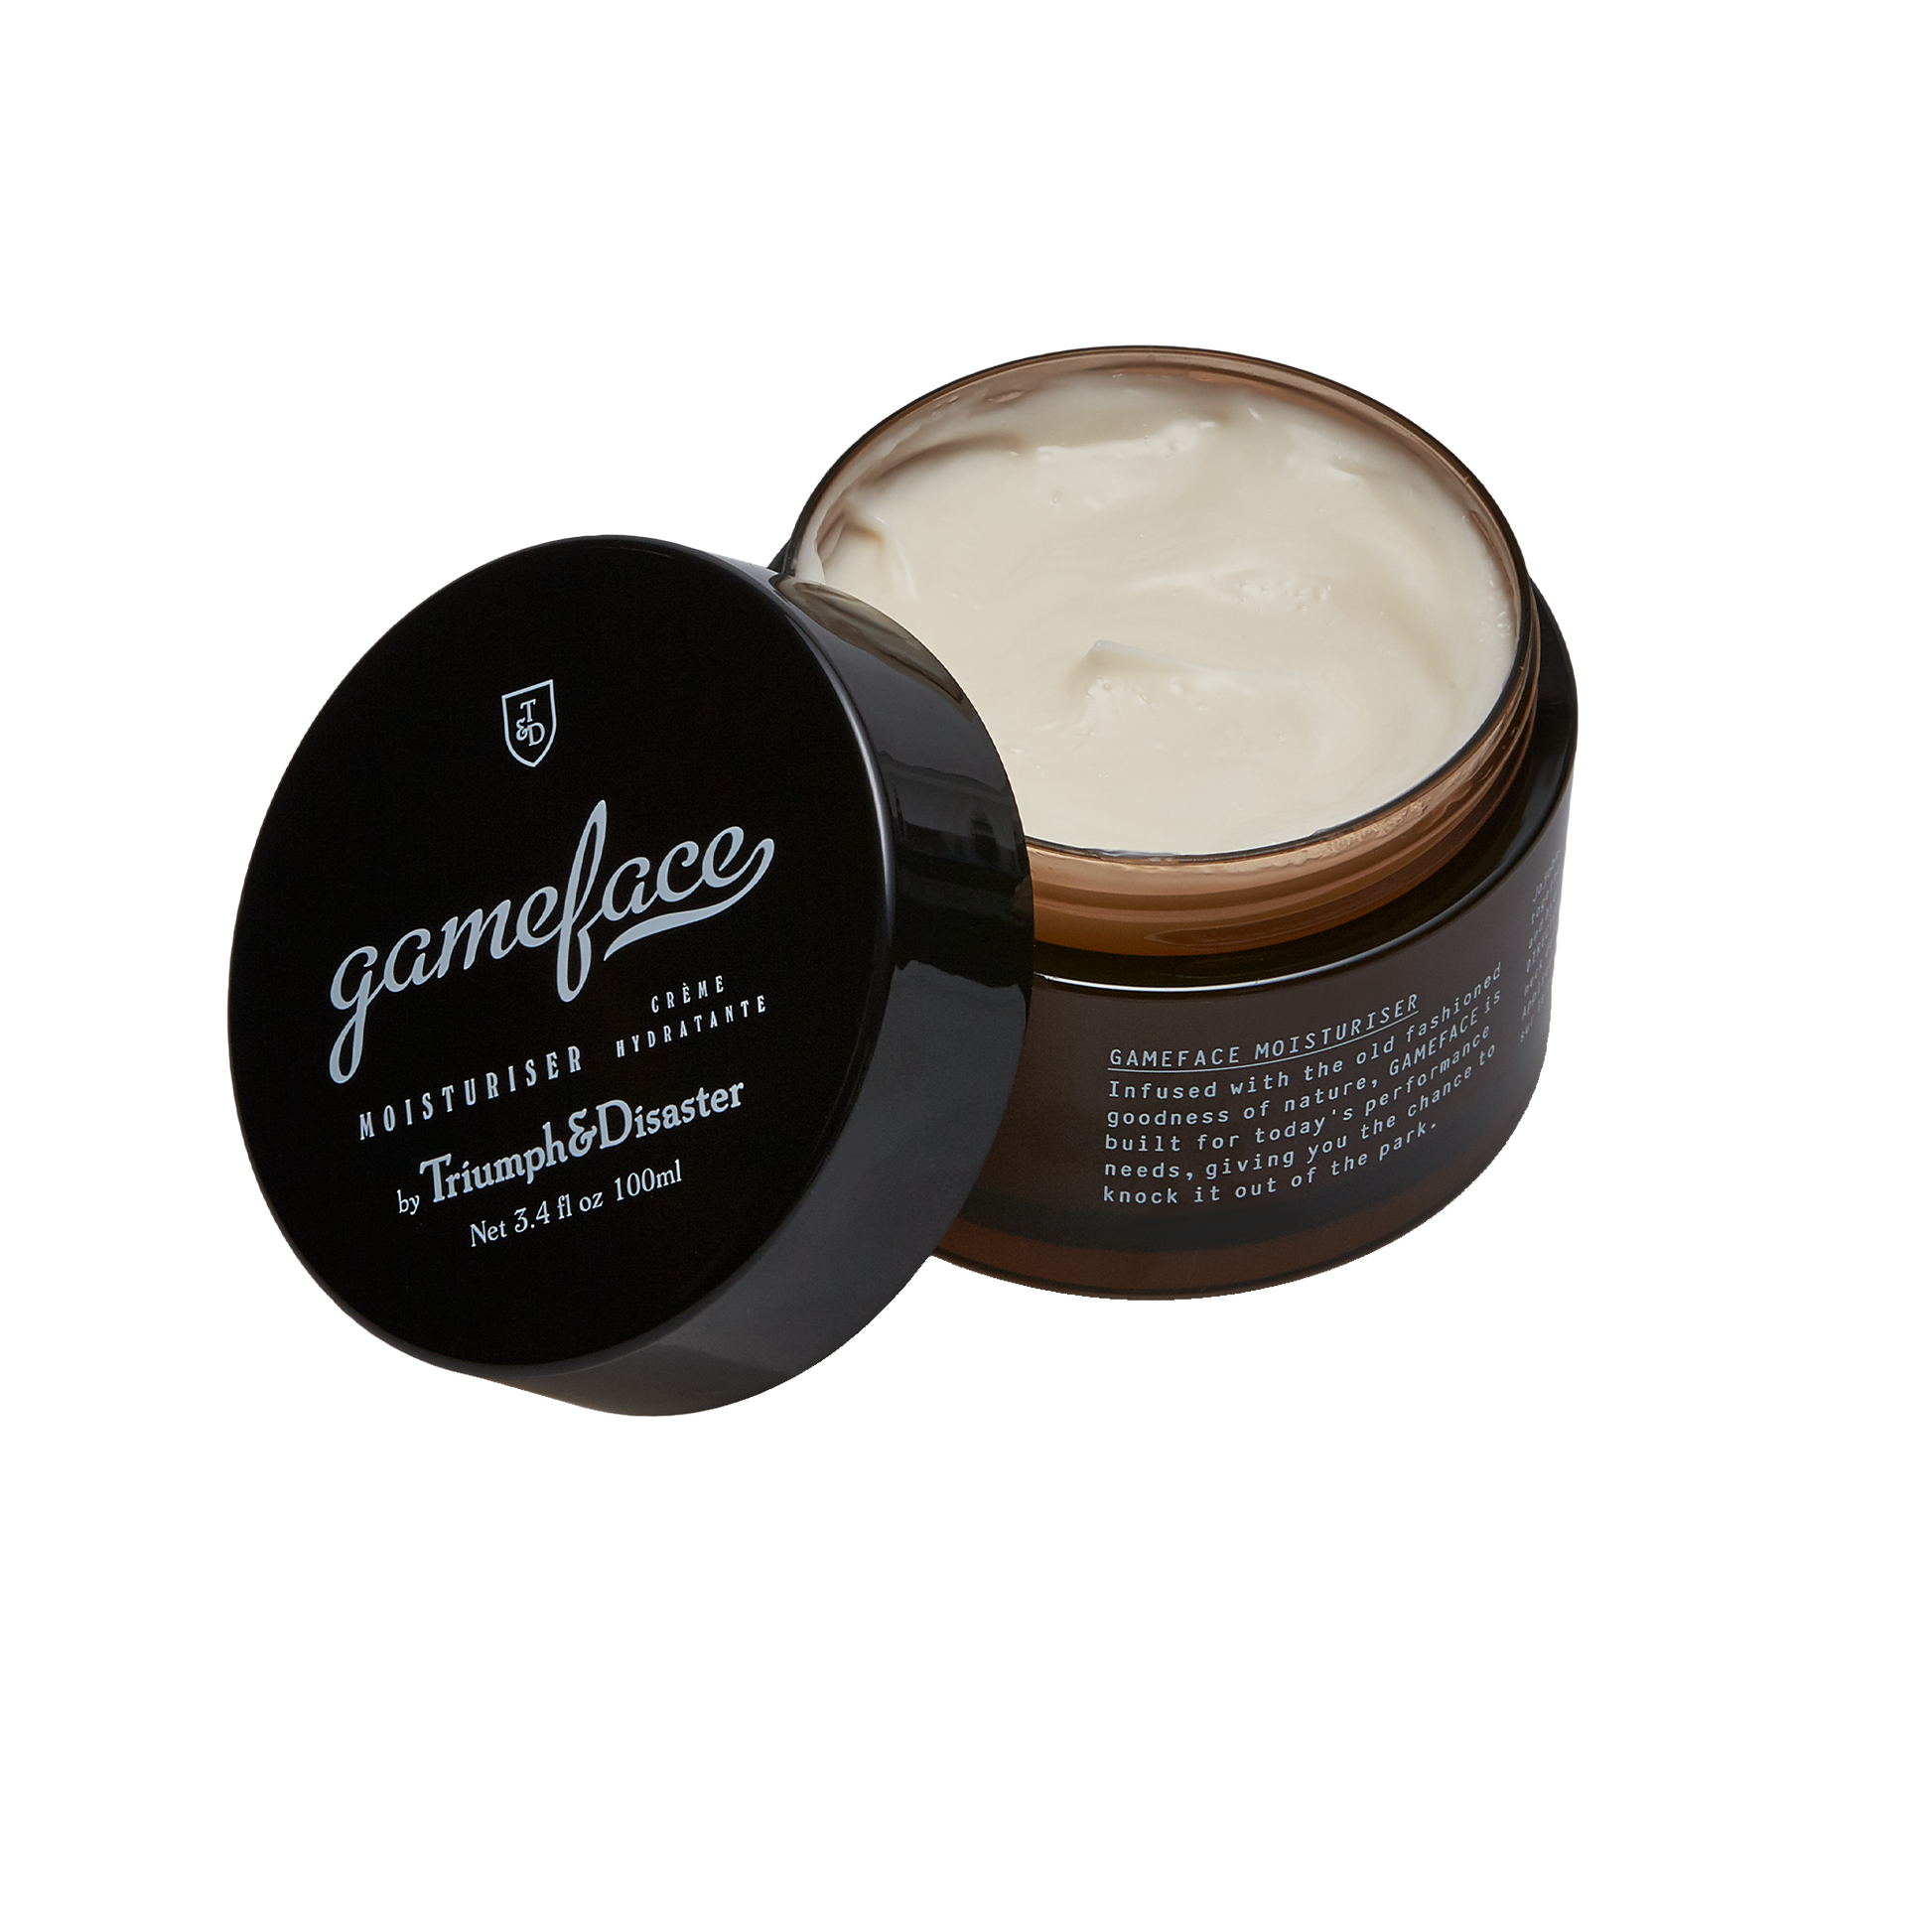 Triumph and Disaster Gameface Moisturiser - Jar: Gameface moisturizer is a tool to serve and protect you against the elements. Specifically engineered to be light on the skin and easily absorbed, Gameface is a unique formulation of Jojoba extract, Horopito oil, Ponga fern (Cumingii) and Vitamin E, combined with a subtle infusion of essential oils to deliver a fragrance we call 'smoke and wood'. The result is a nutrient rich, hydrating cream that will leave skin feeling toned, supple and fresh.